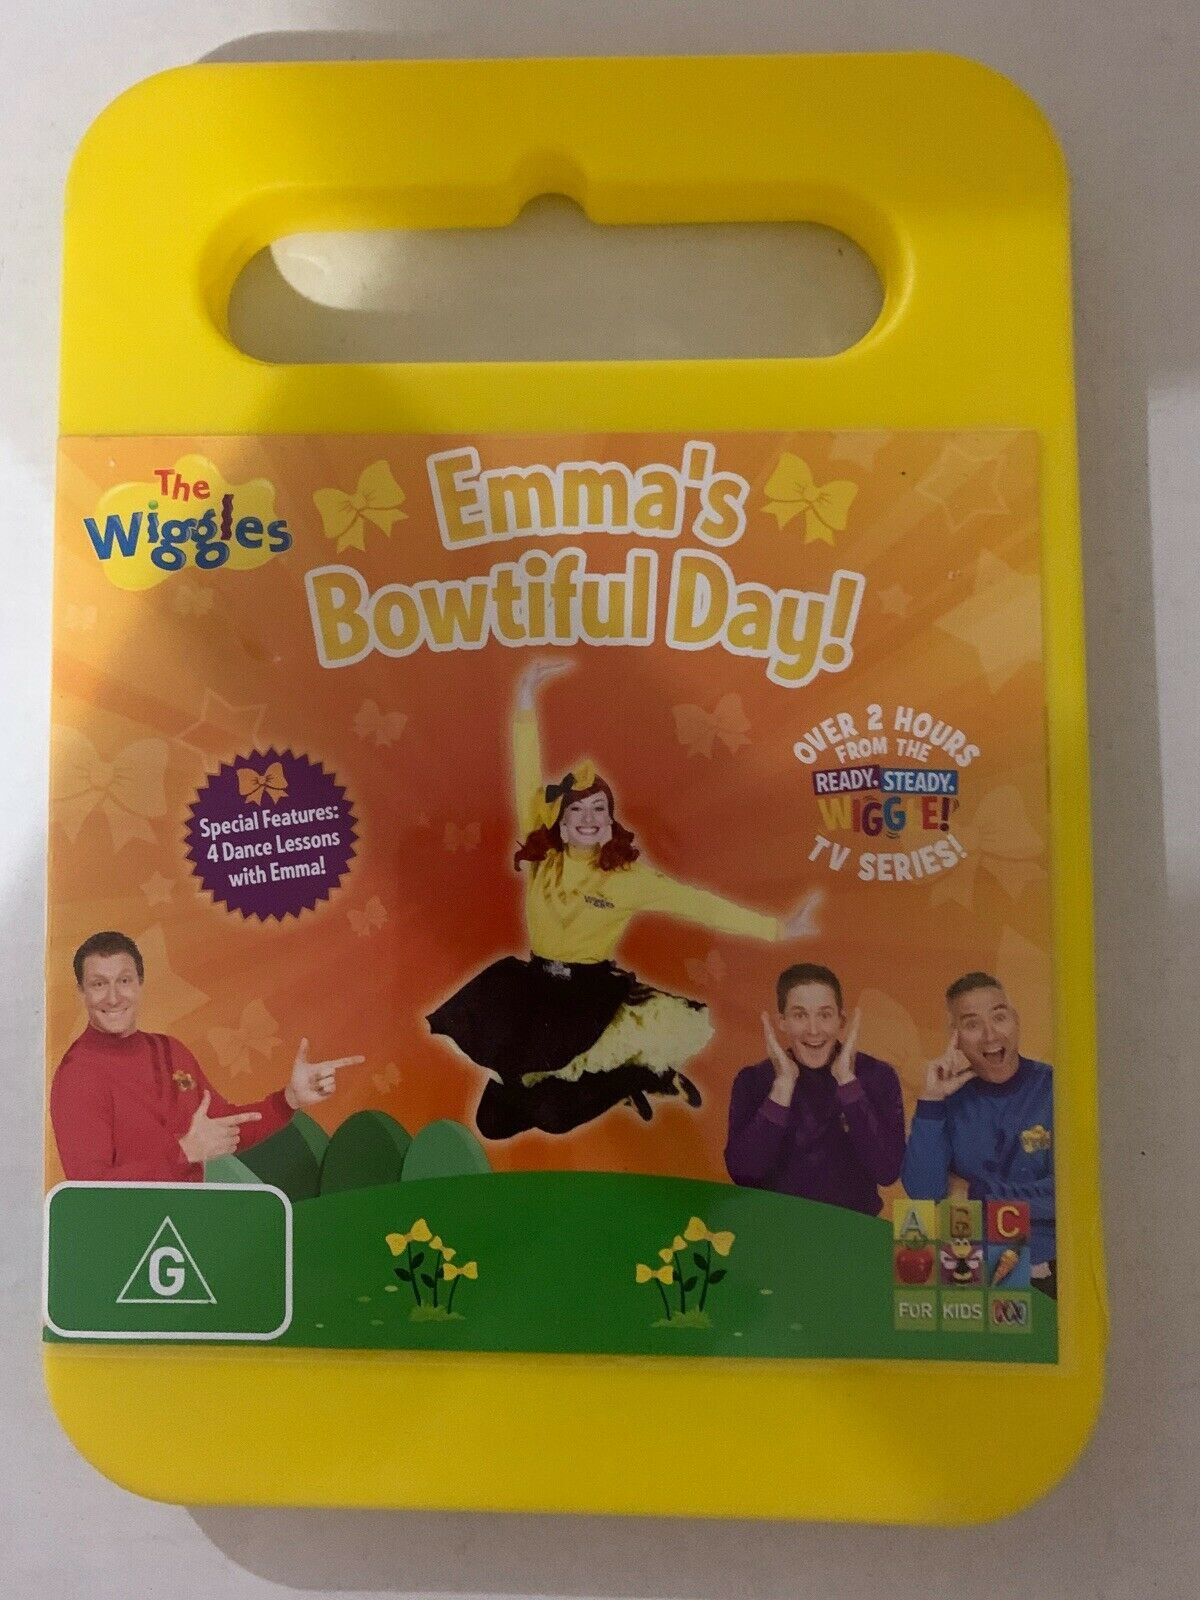 THE WIGGLES - Emma's Bowtiful Day! DVD  ABC KIDS MUSIC SONGS Region 4